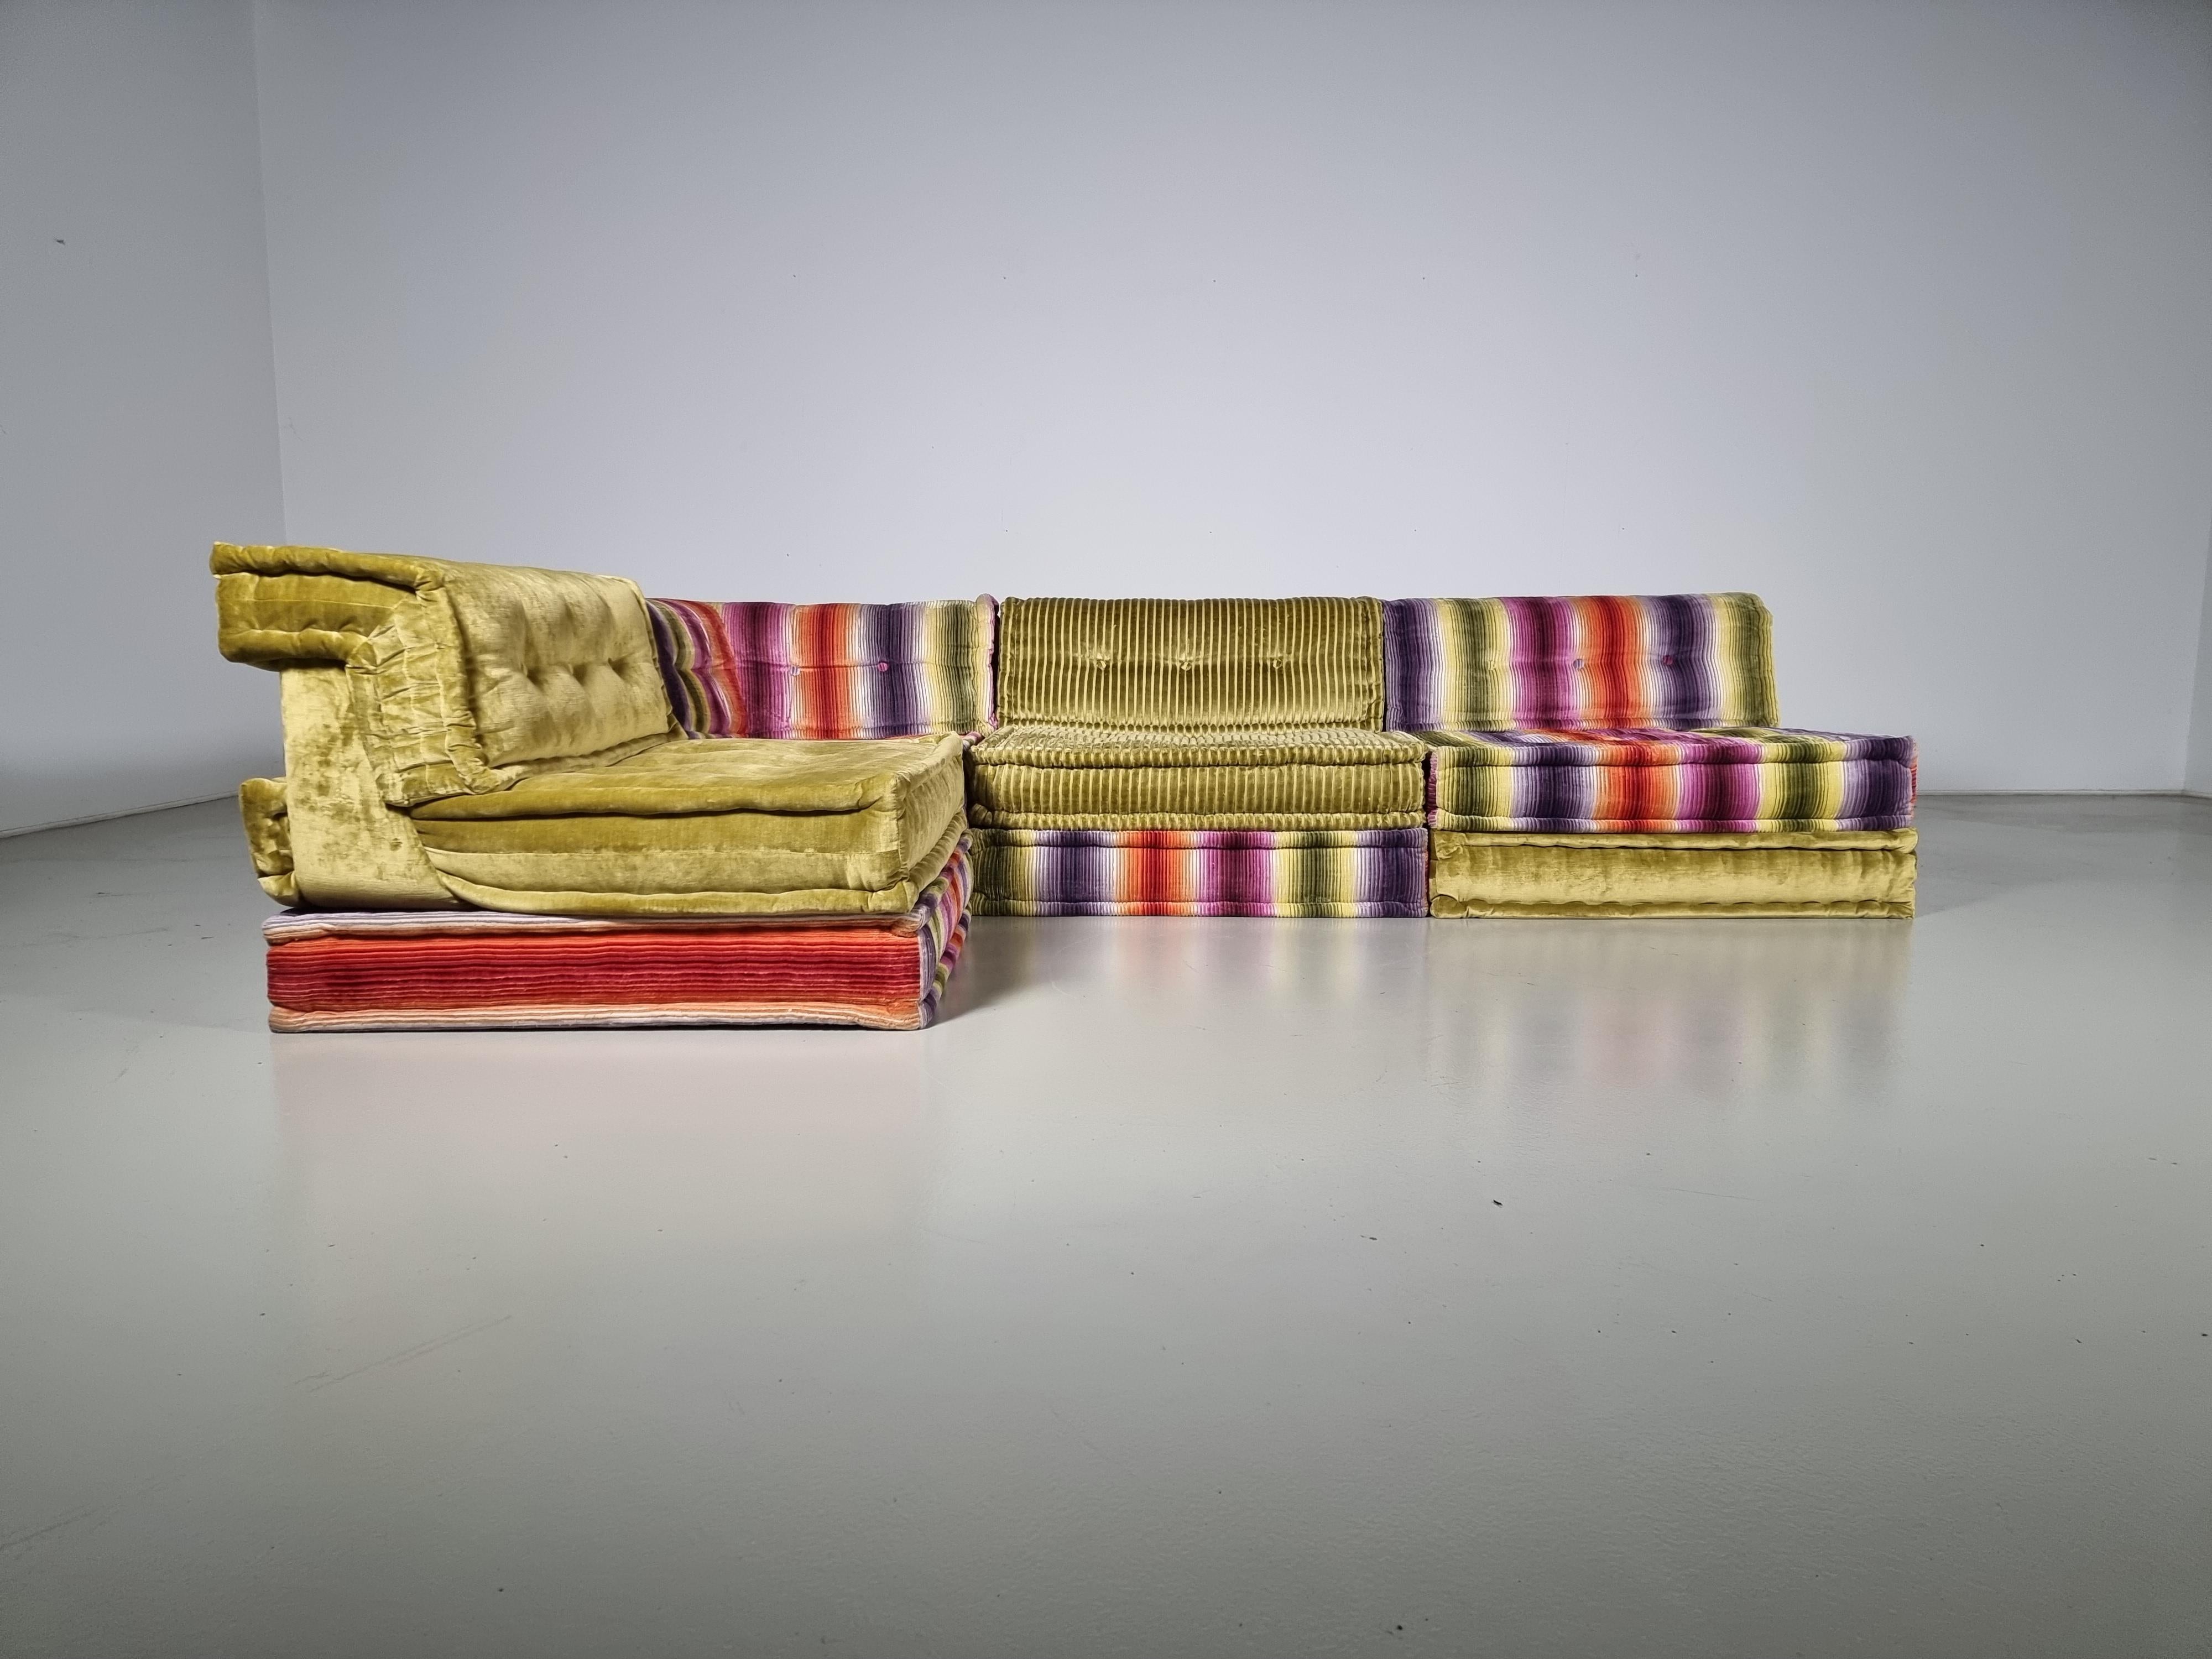 Mah Jong modular sofa set by Hans Hopfer, designed in 1971 for Roche Bobois and in a current customized mix of textiles by the house of Missoni. Features multiple cushions that can be arranged in an endless number of ways, This set includes 8